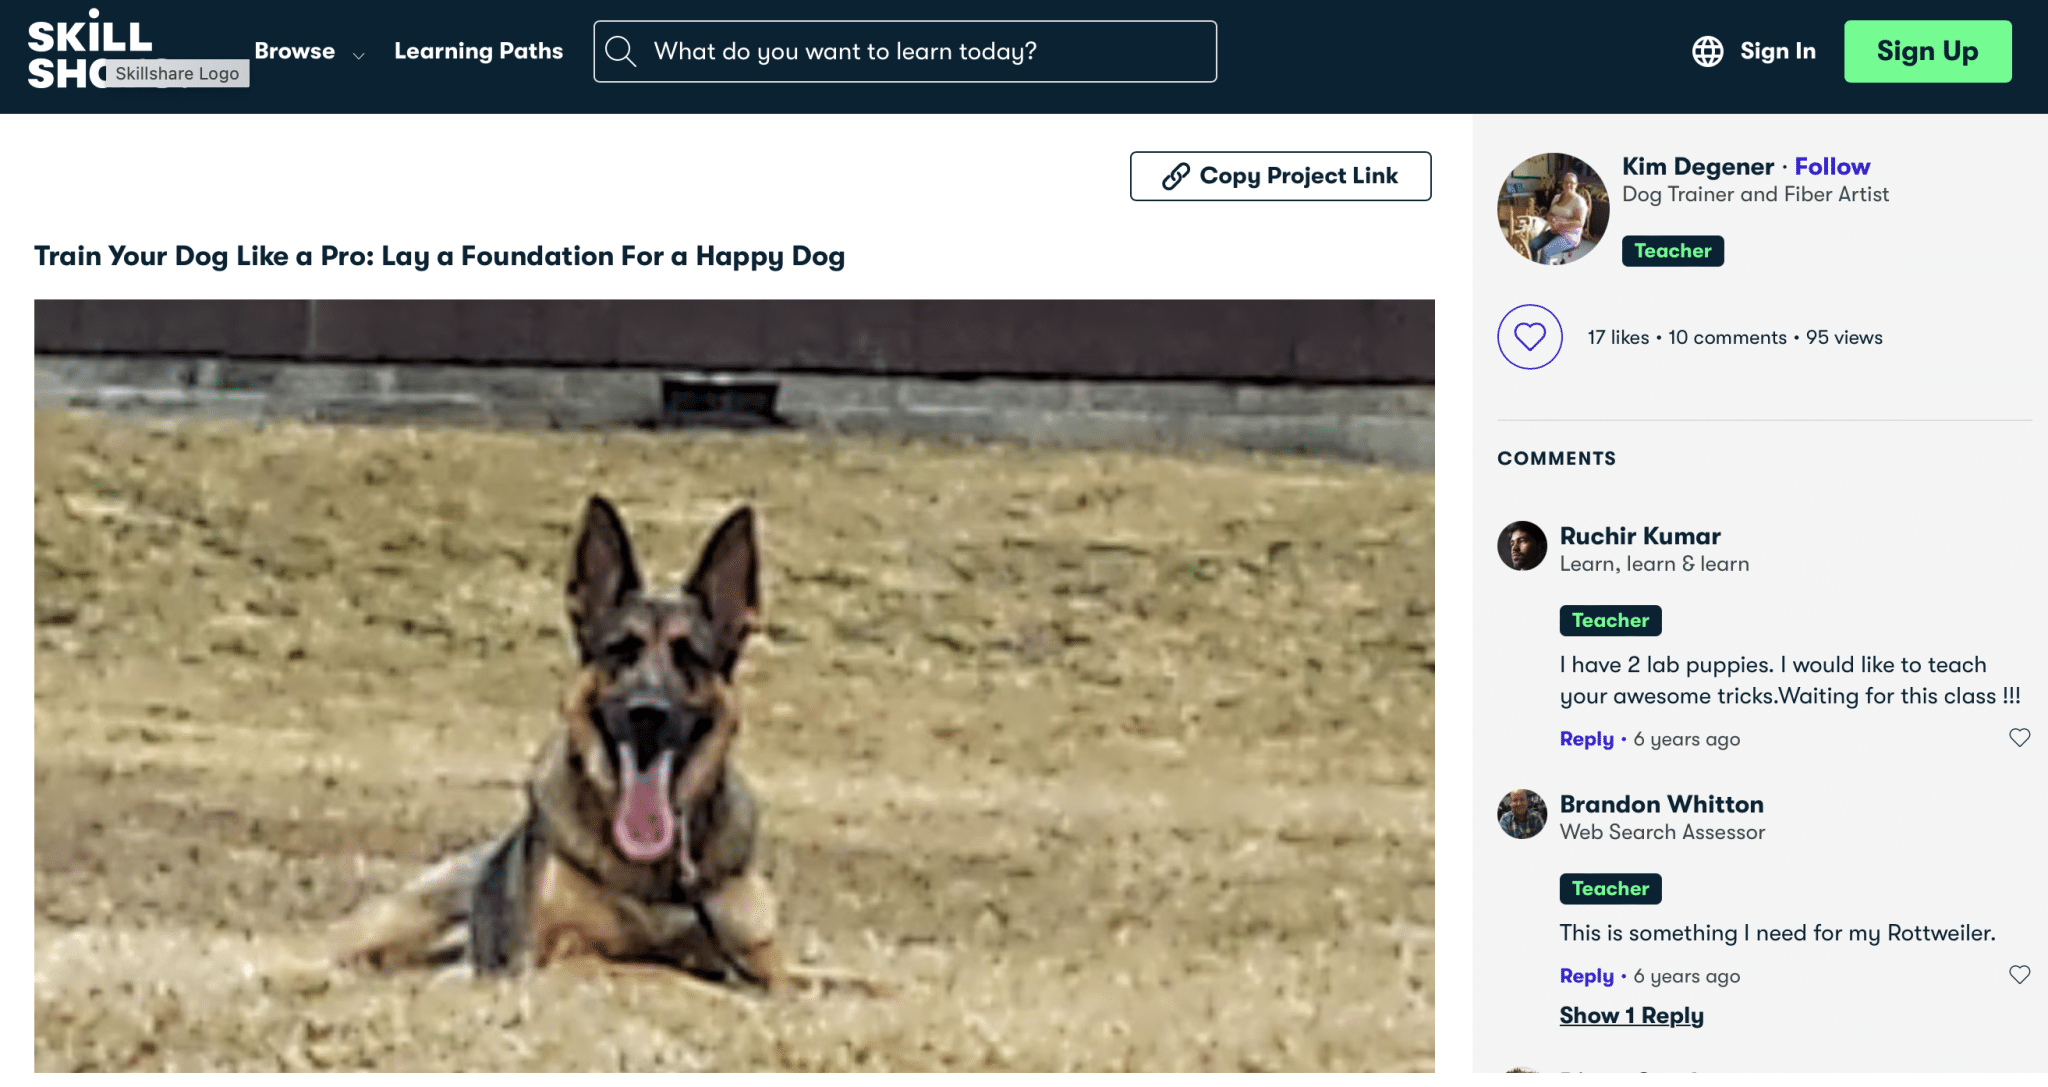 Skillshare Train Your Dog Like a Pro Lay a Foundation For a Happy Dog